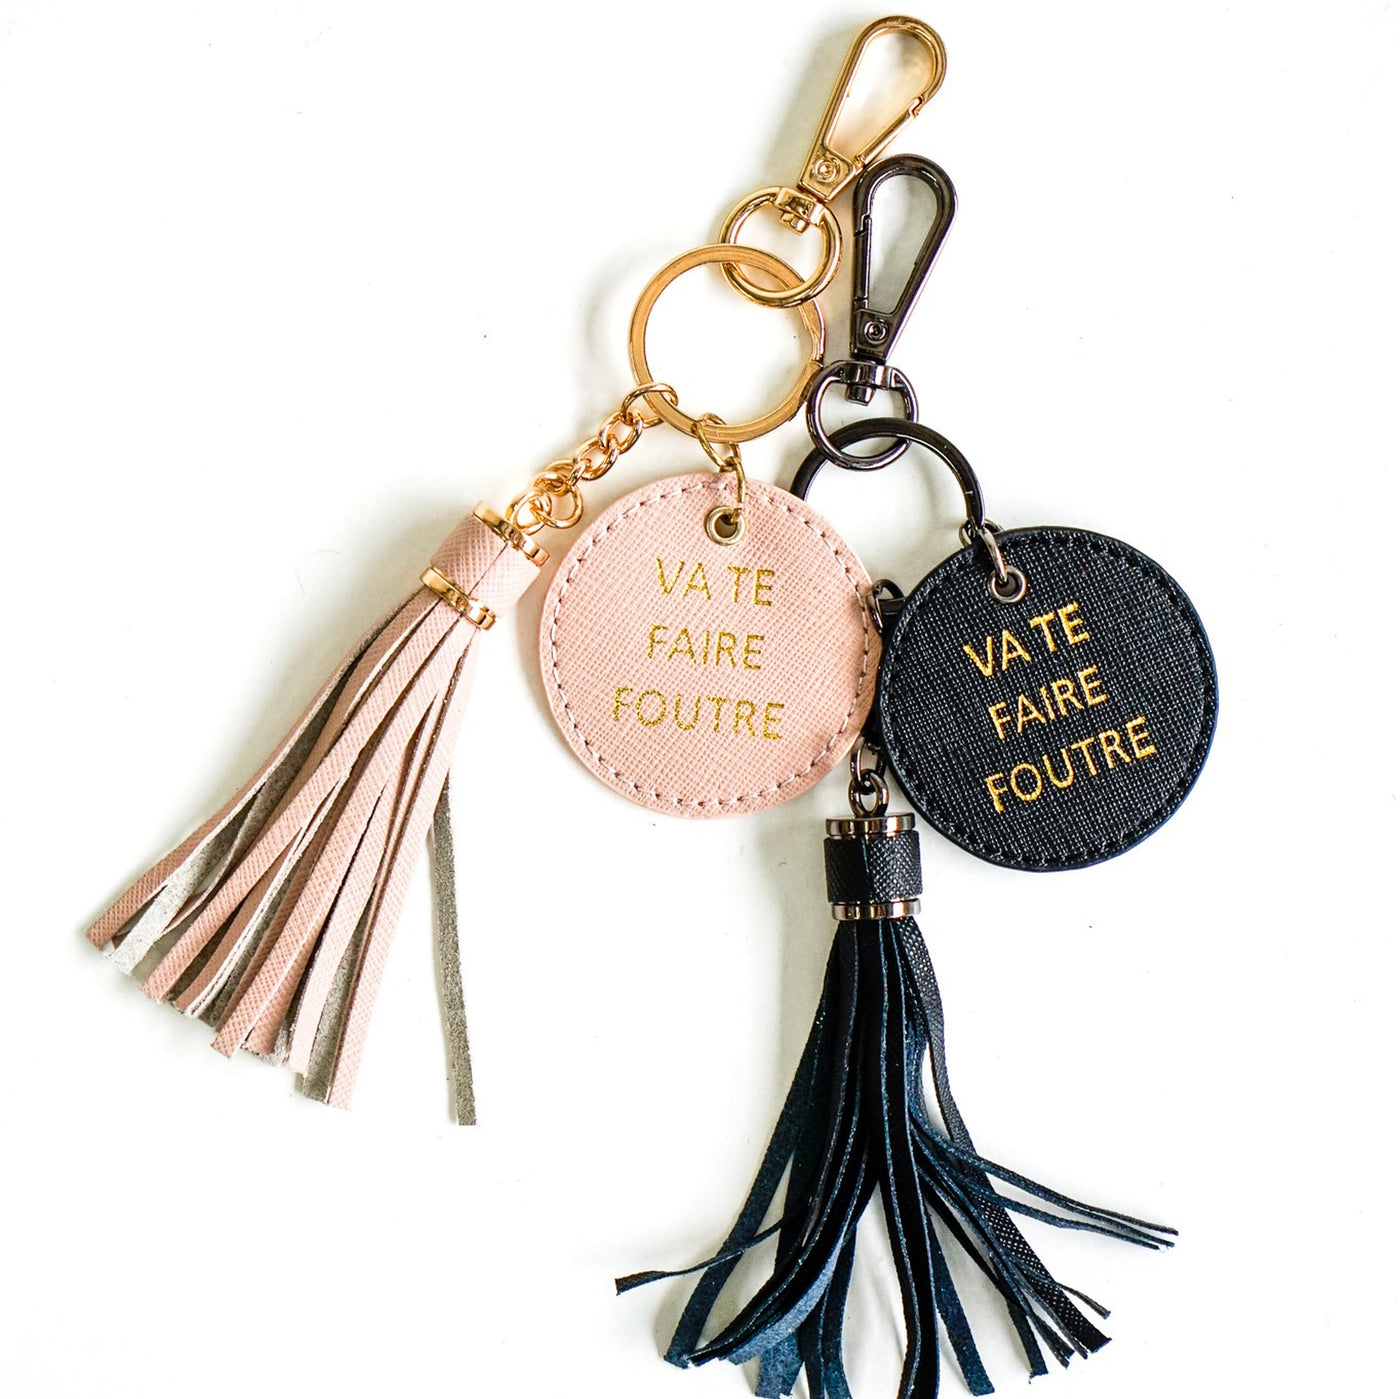 Go F yourself Black keyring - Branche Store